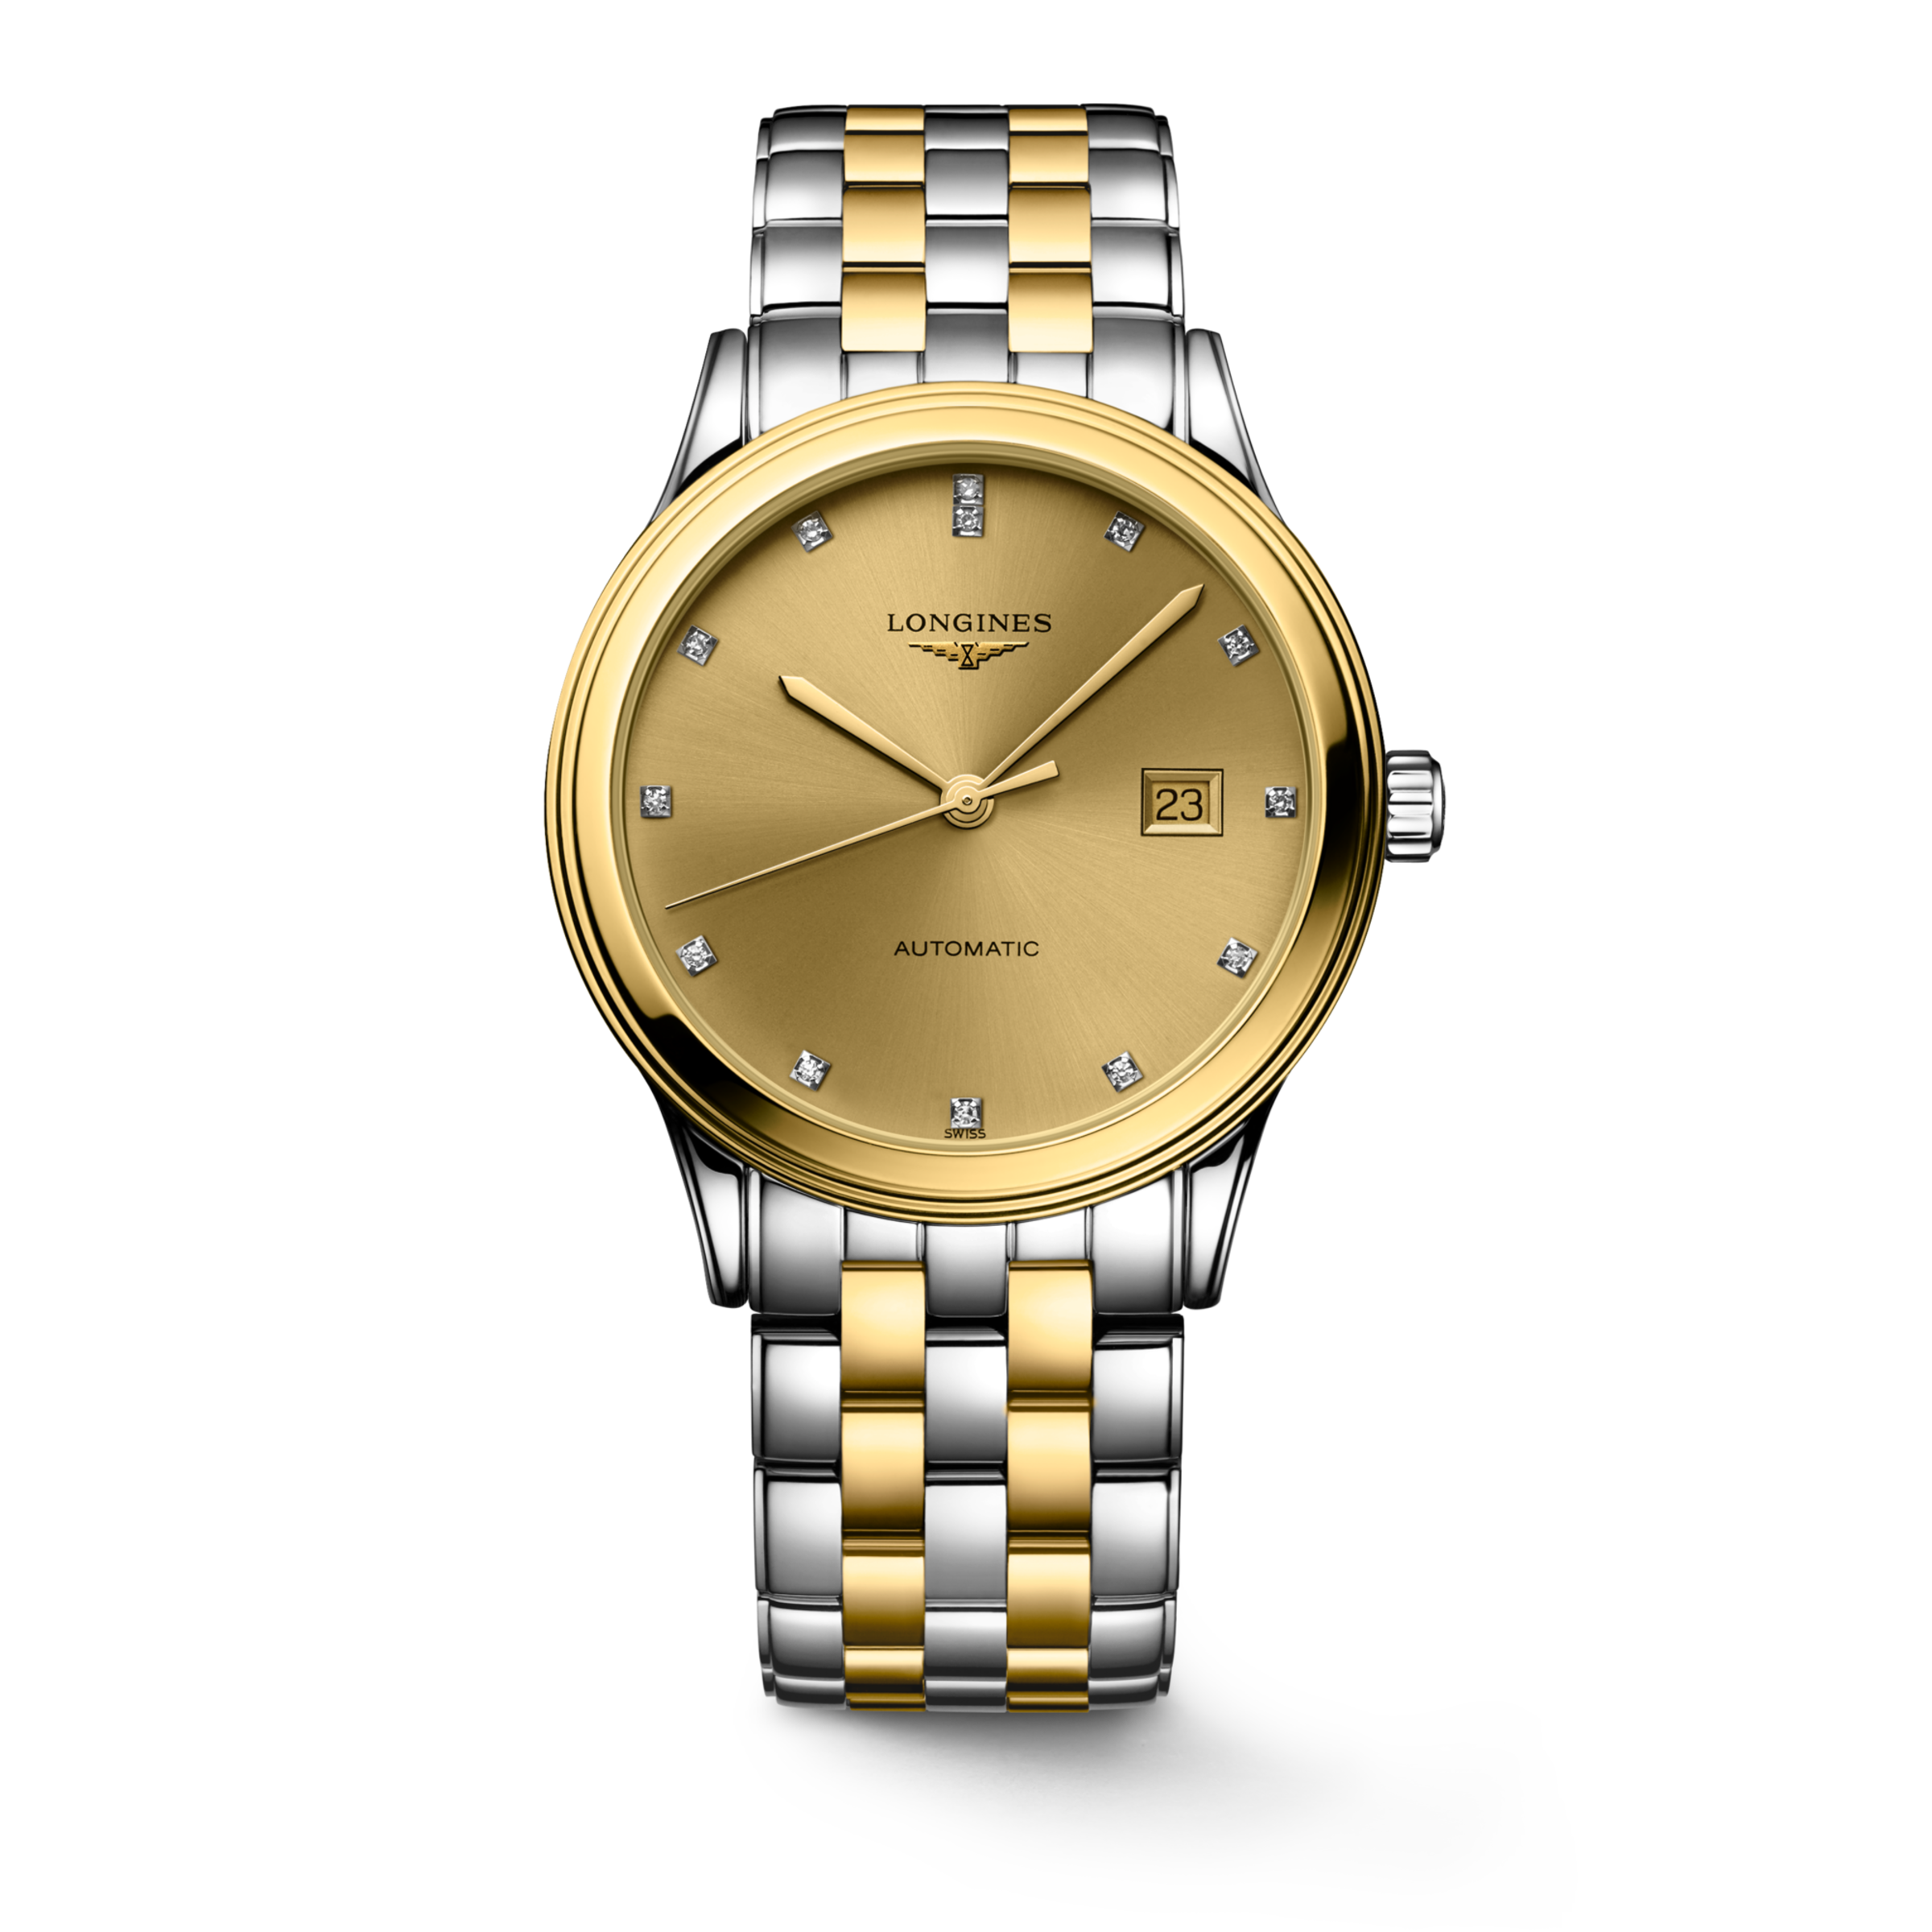 Longines FLAGSHIP Automatic Stainless steel and yellow PVD coating Watch - L4.984.3.37.7